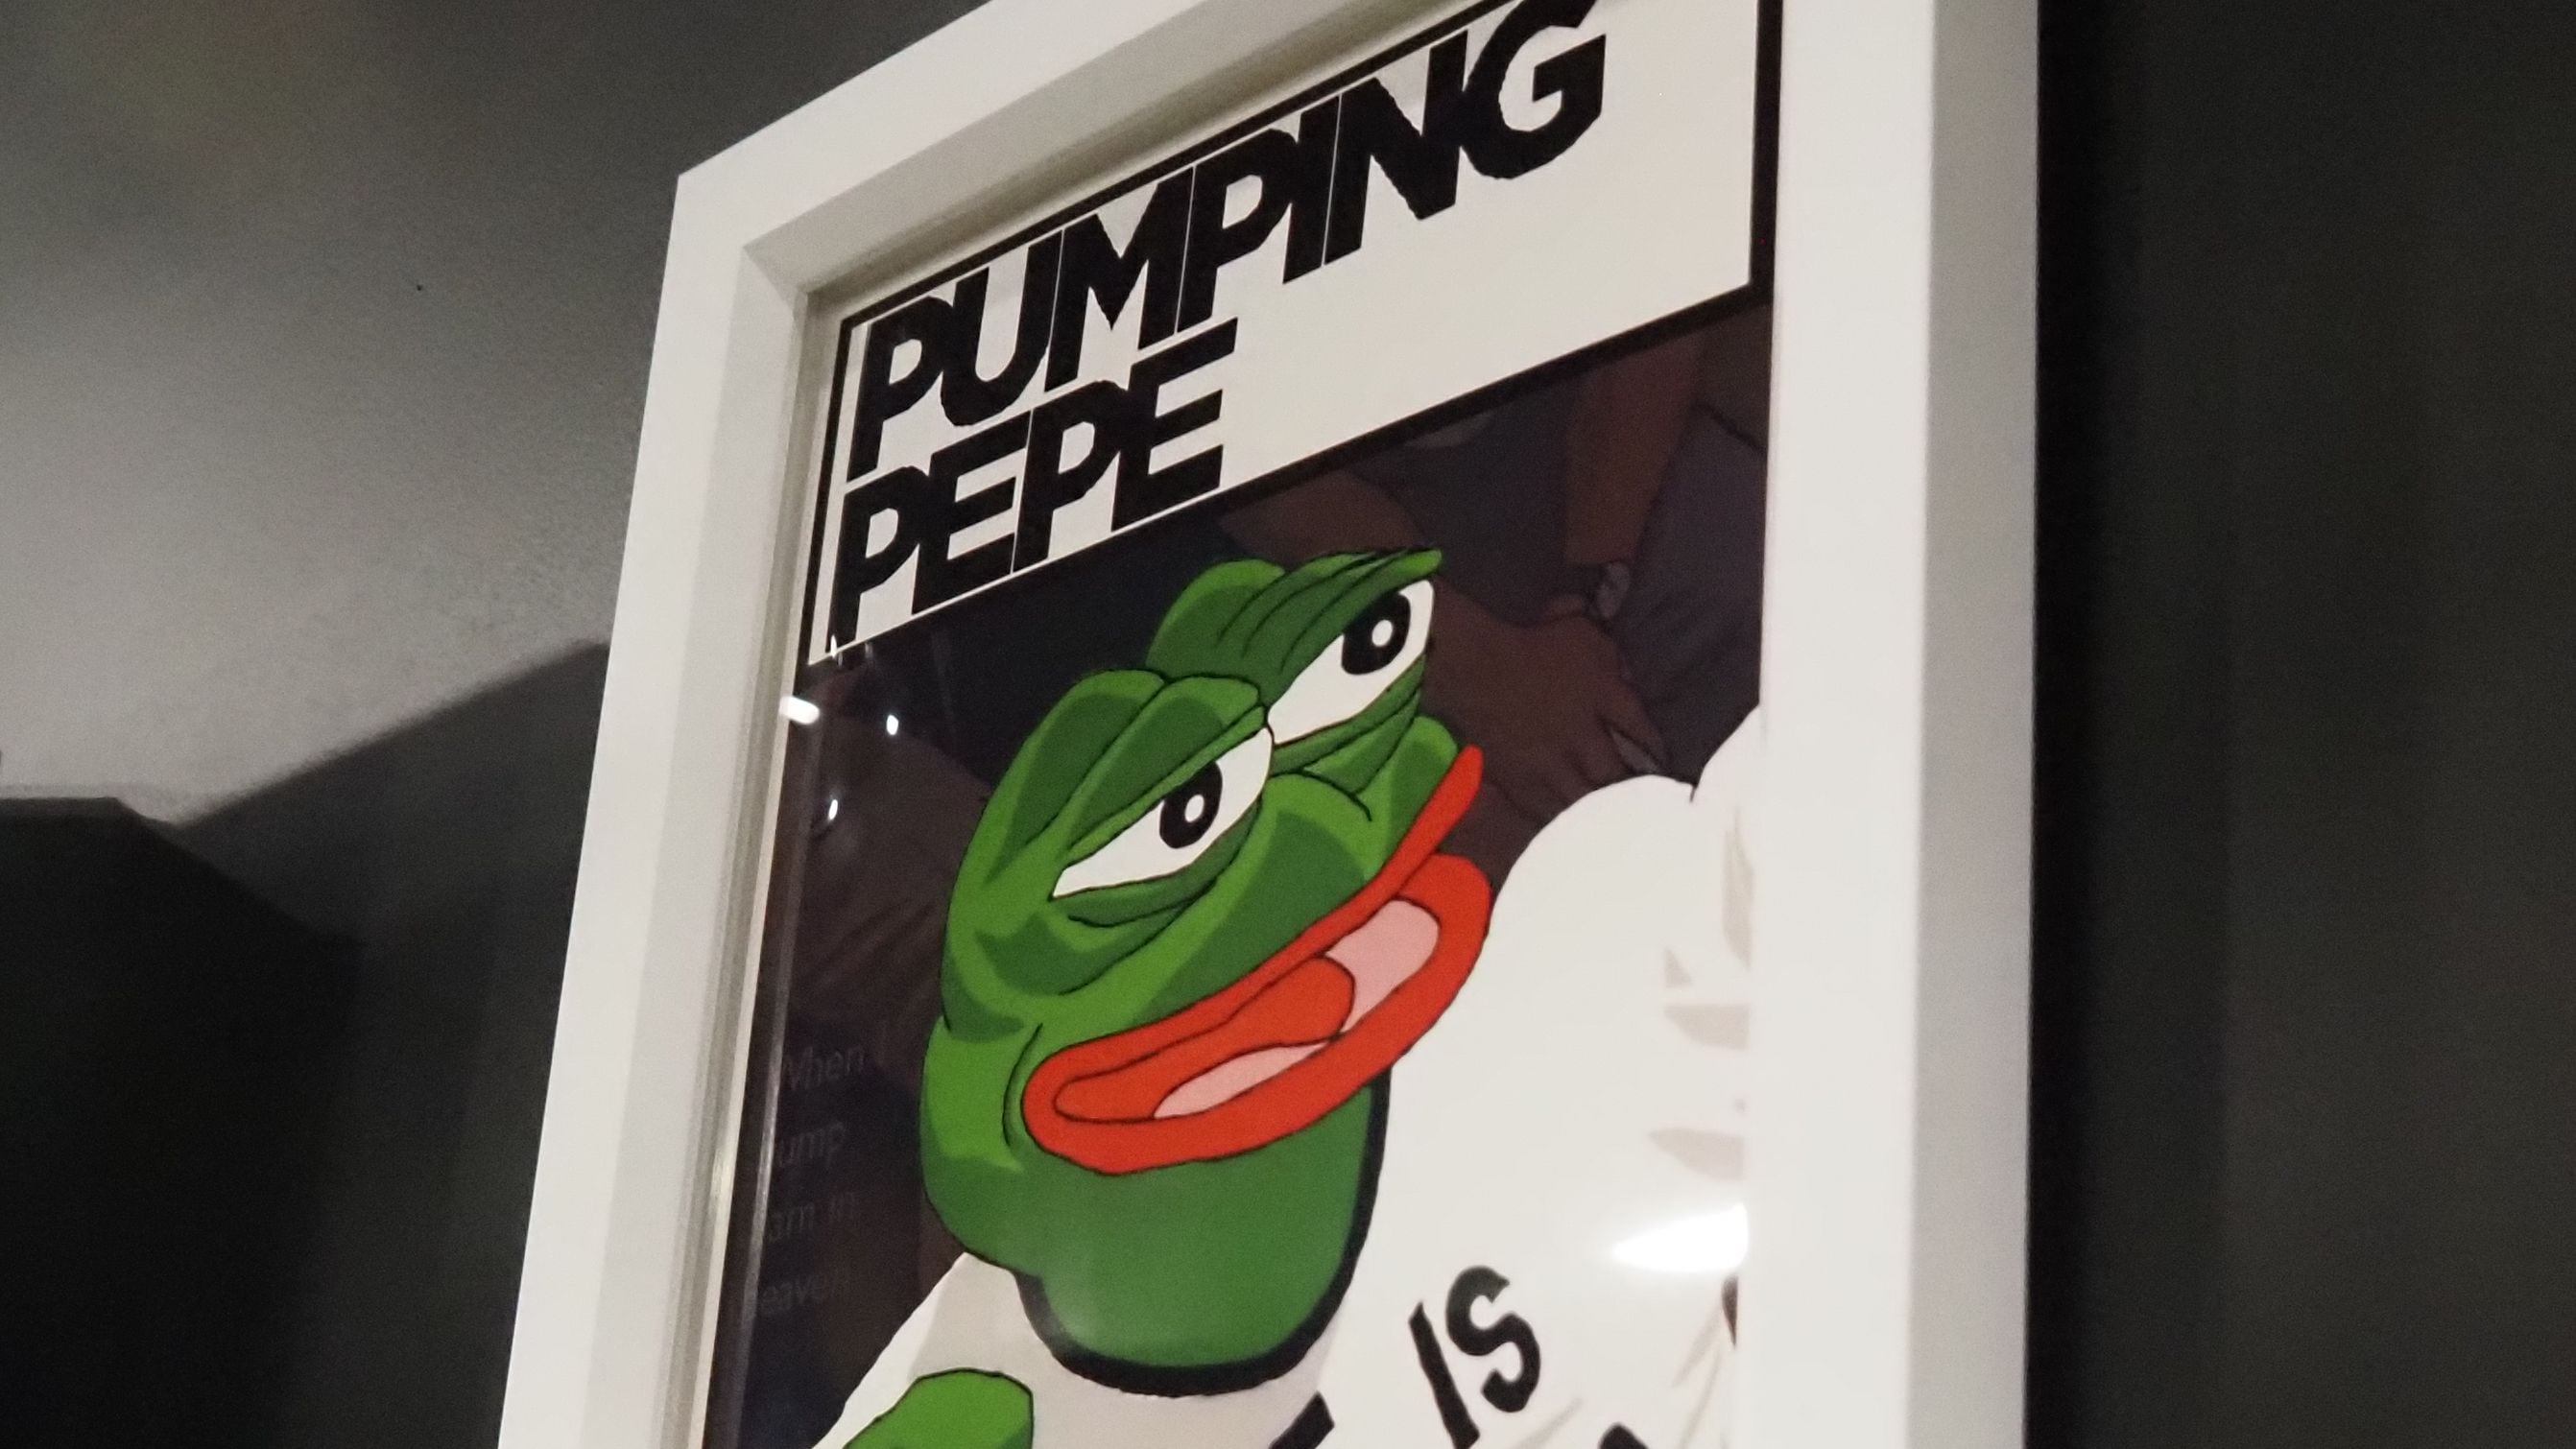 What is PEPE? Will it lead to the next rise of memecoin? - Phemex